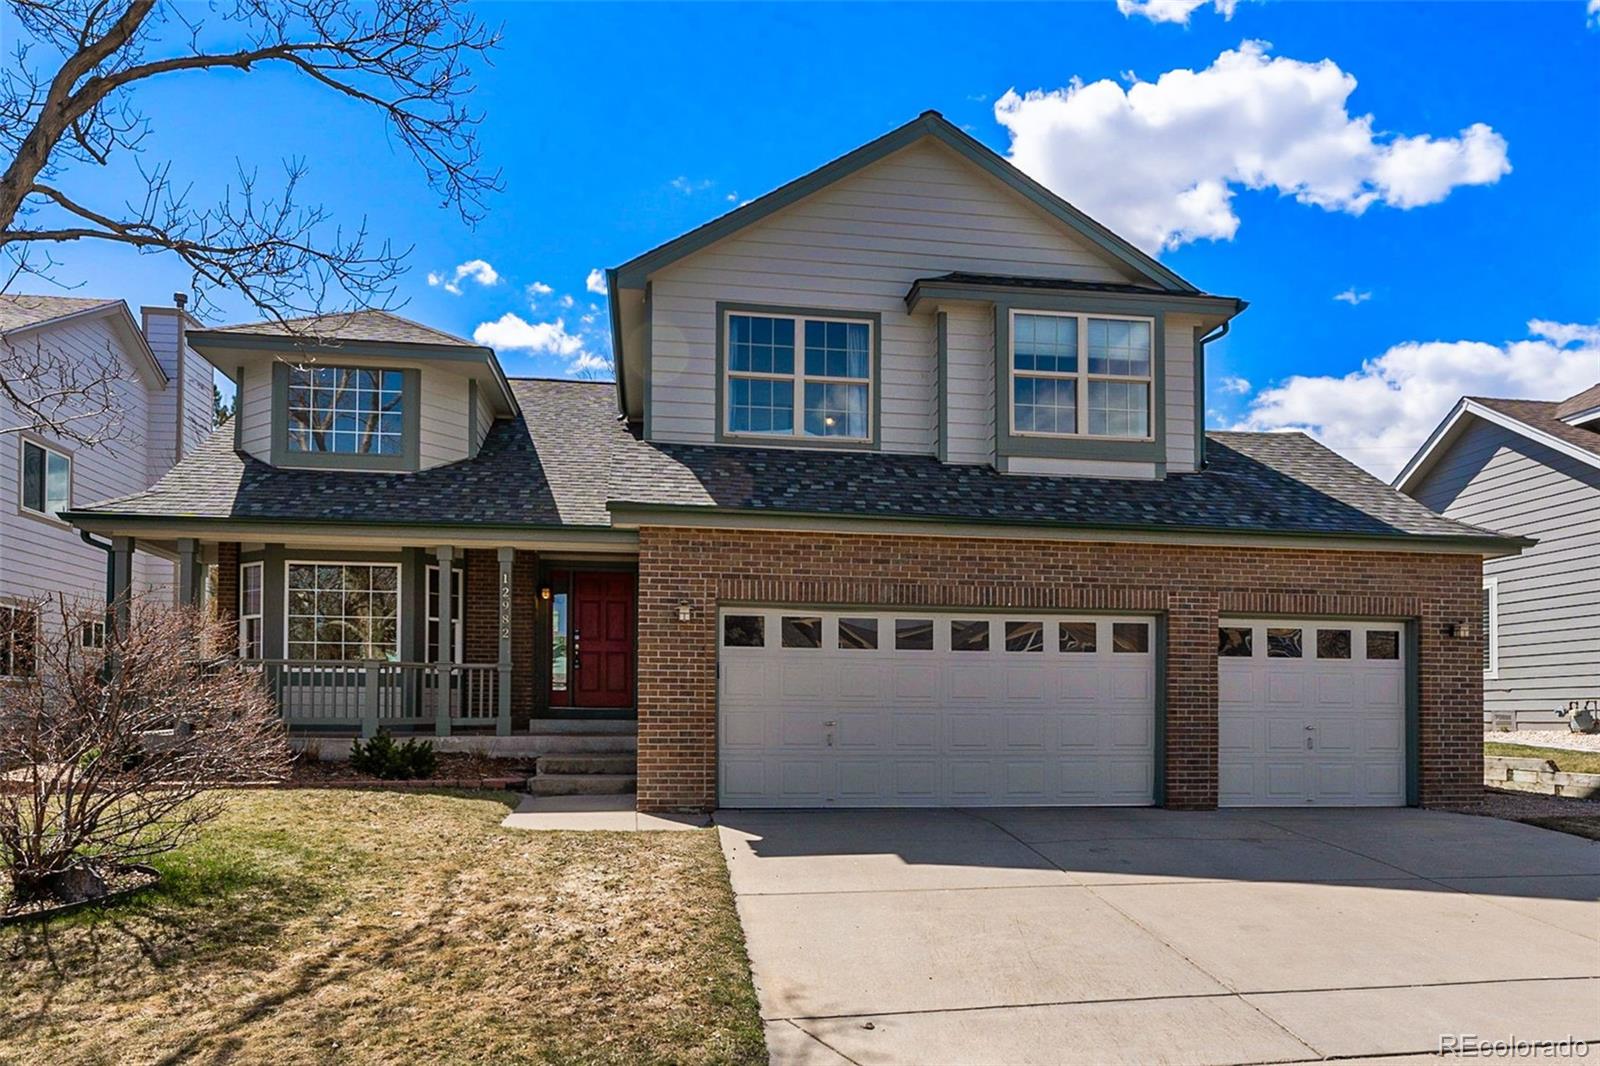 12982 W 84th Place, arvada MLS: 9422374 Beds: 5 Baths: 4 Price: $860,000